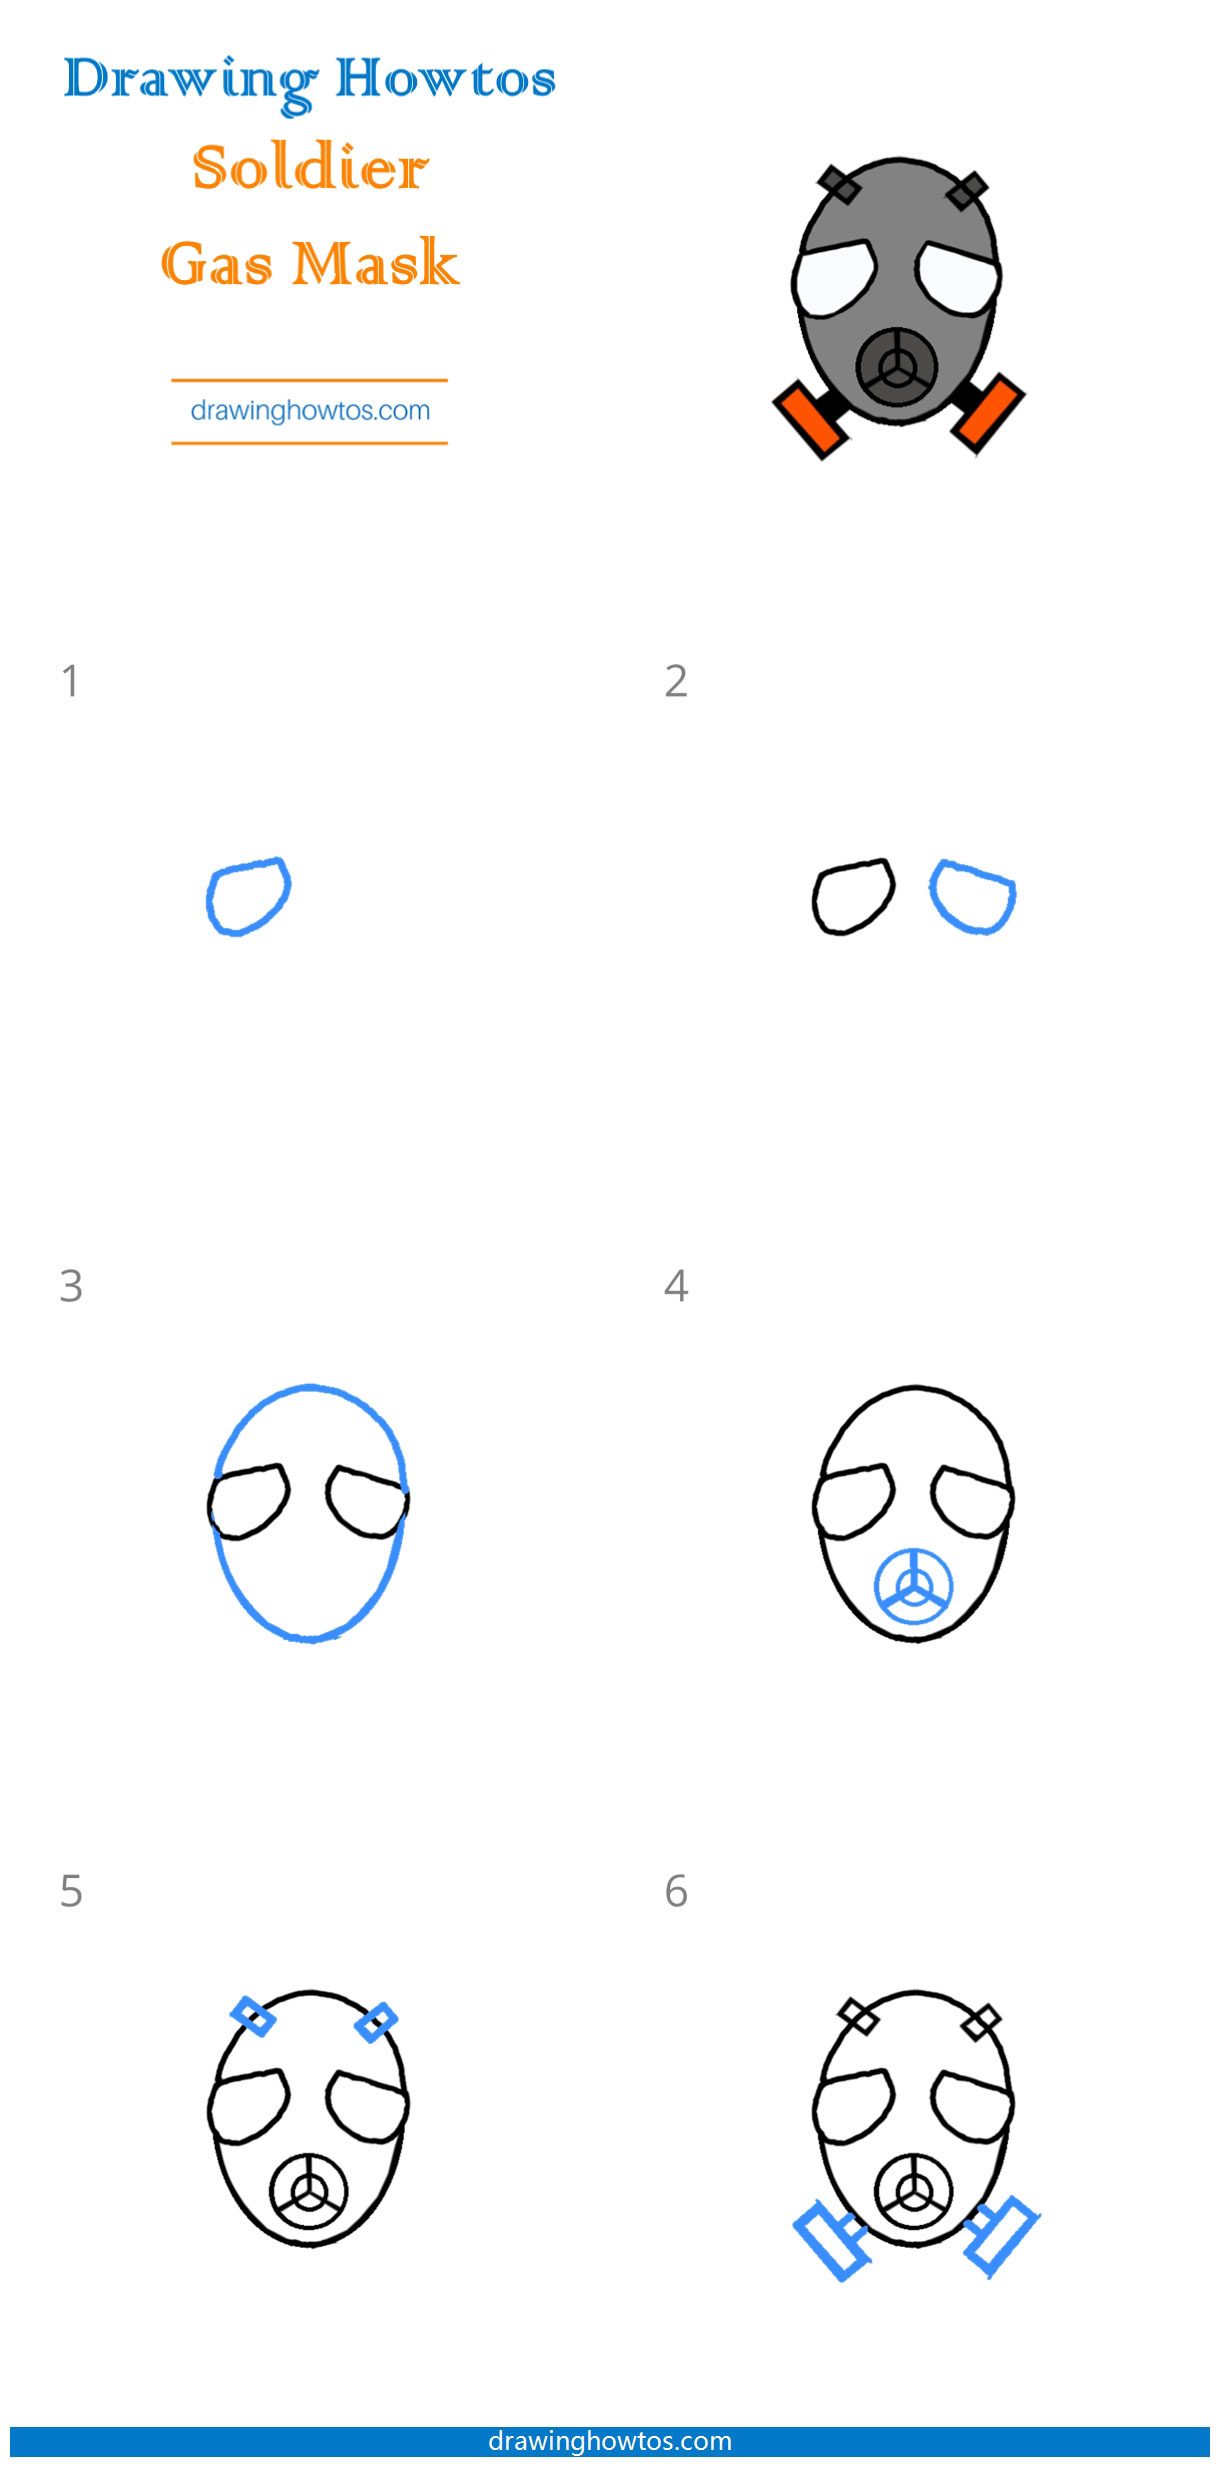 How to Draw a Gas Mask Step by Step